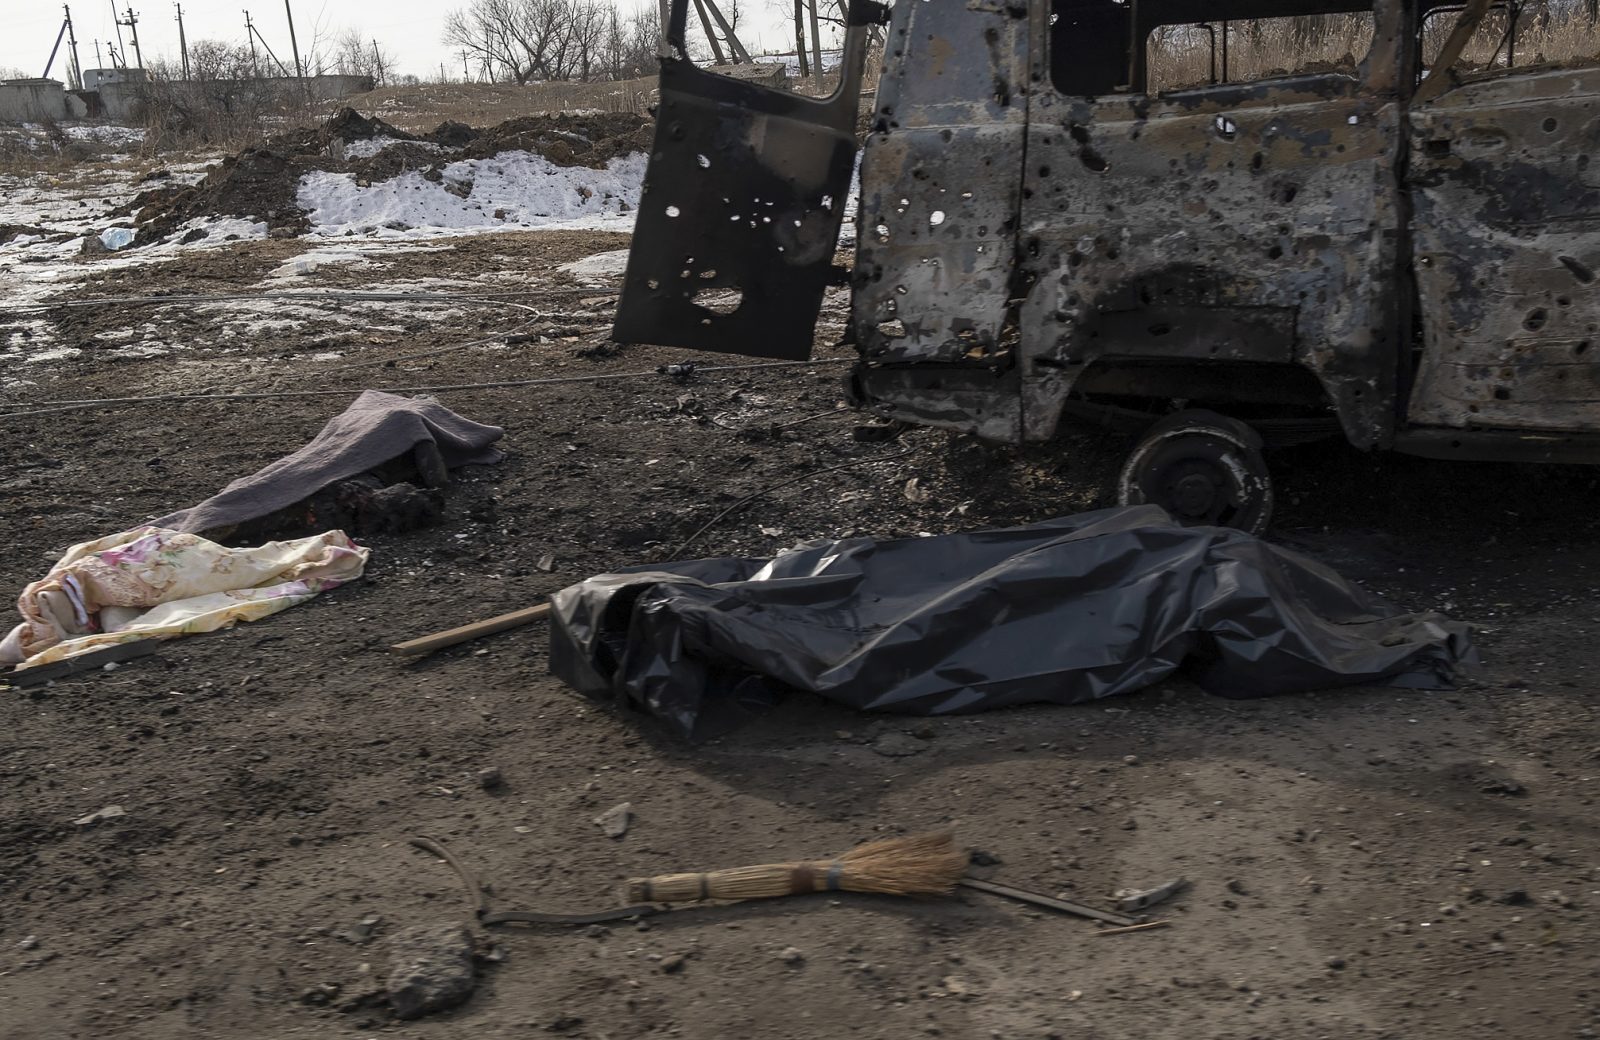 epa10489118 Covered bodies of two locals killed in shelling lie on a road in Bakhmut, Ukraine, 24 February 2023. Russian troops entered Ukrainian territory on 24 February 2022, starting a conflict that has provoked destruction and a humanitarian crisis. One year on, fighting continues in many parts of the country.  EPA/GEORGE IVANCHENKO